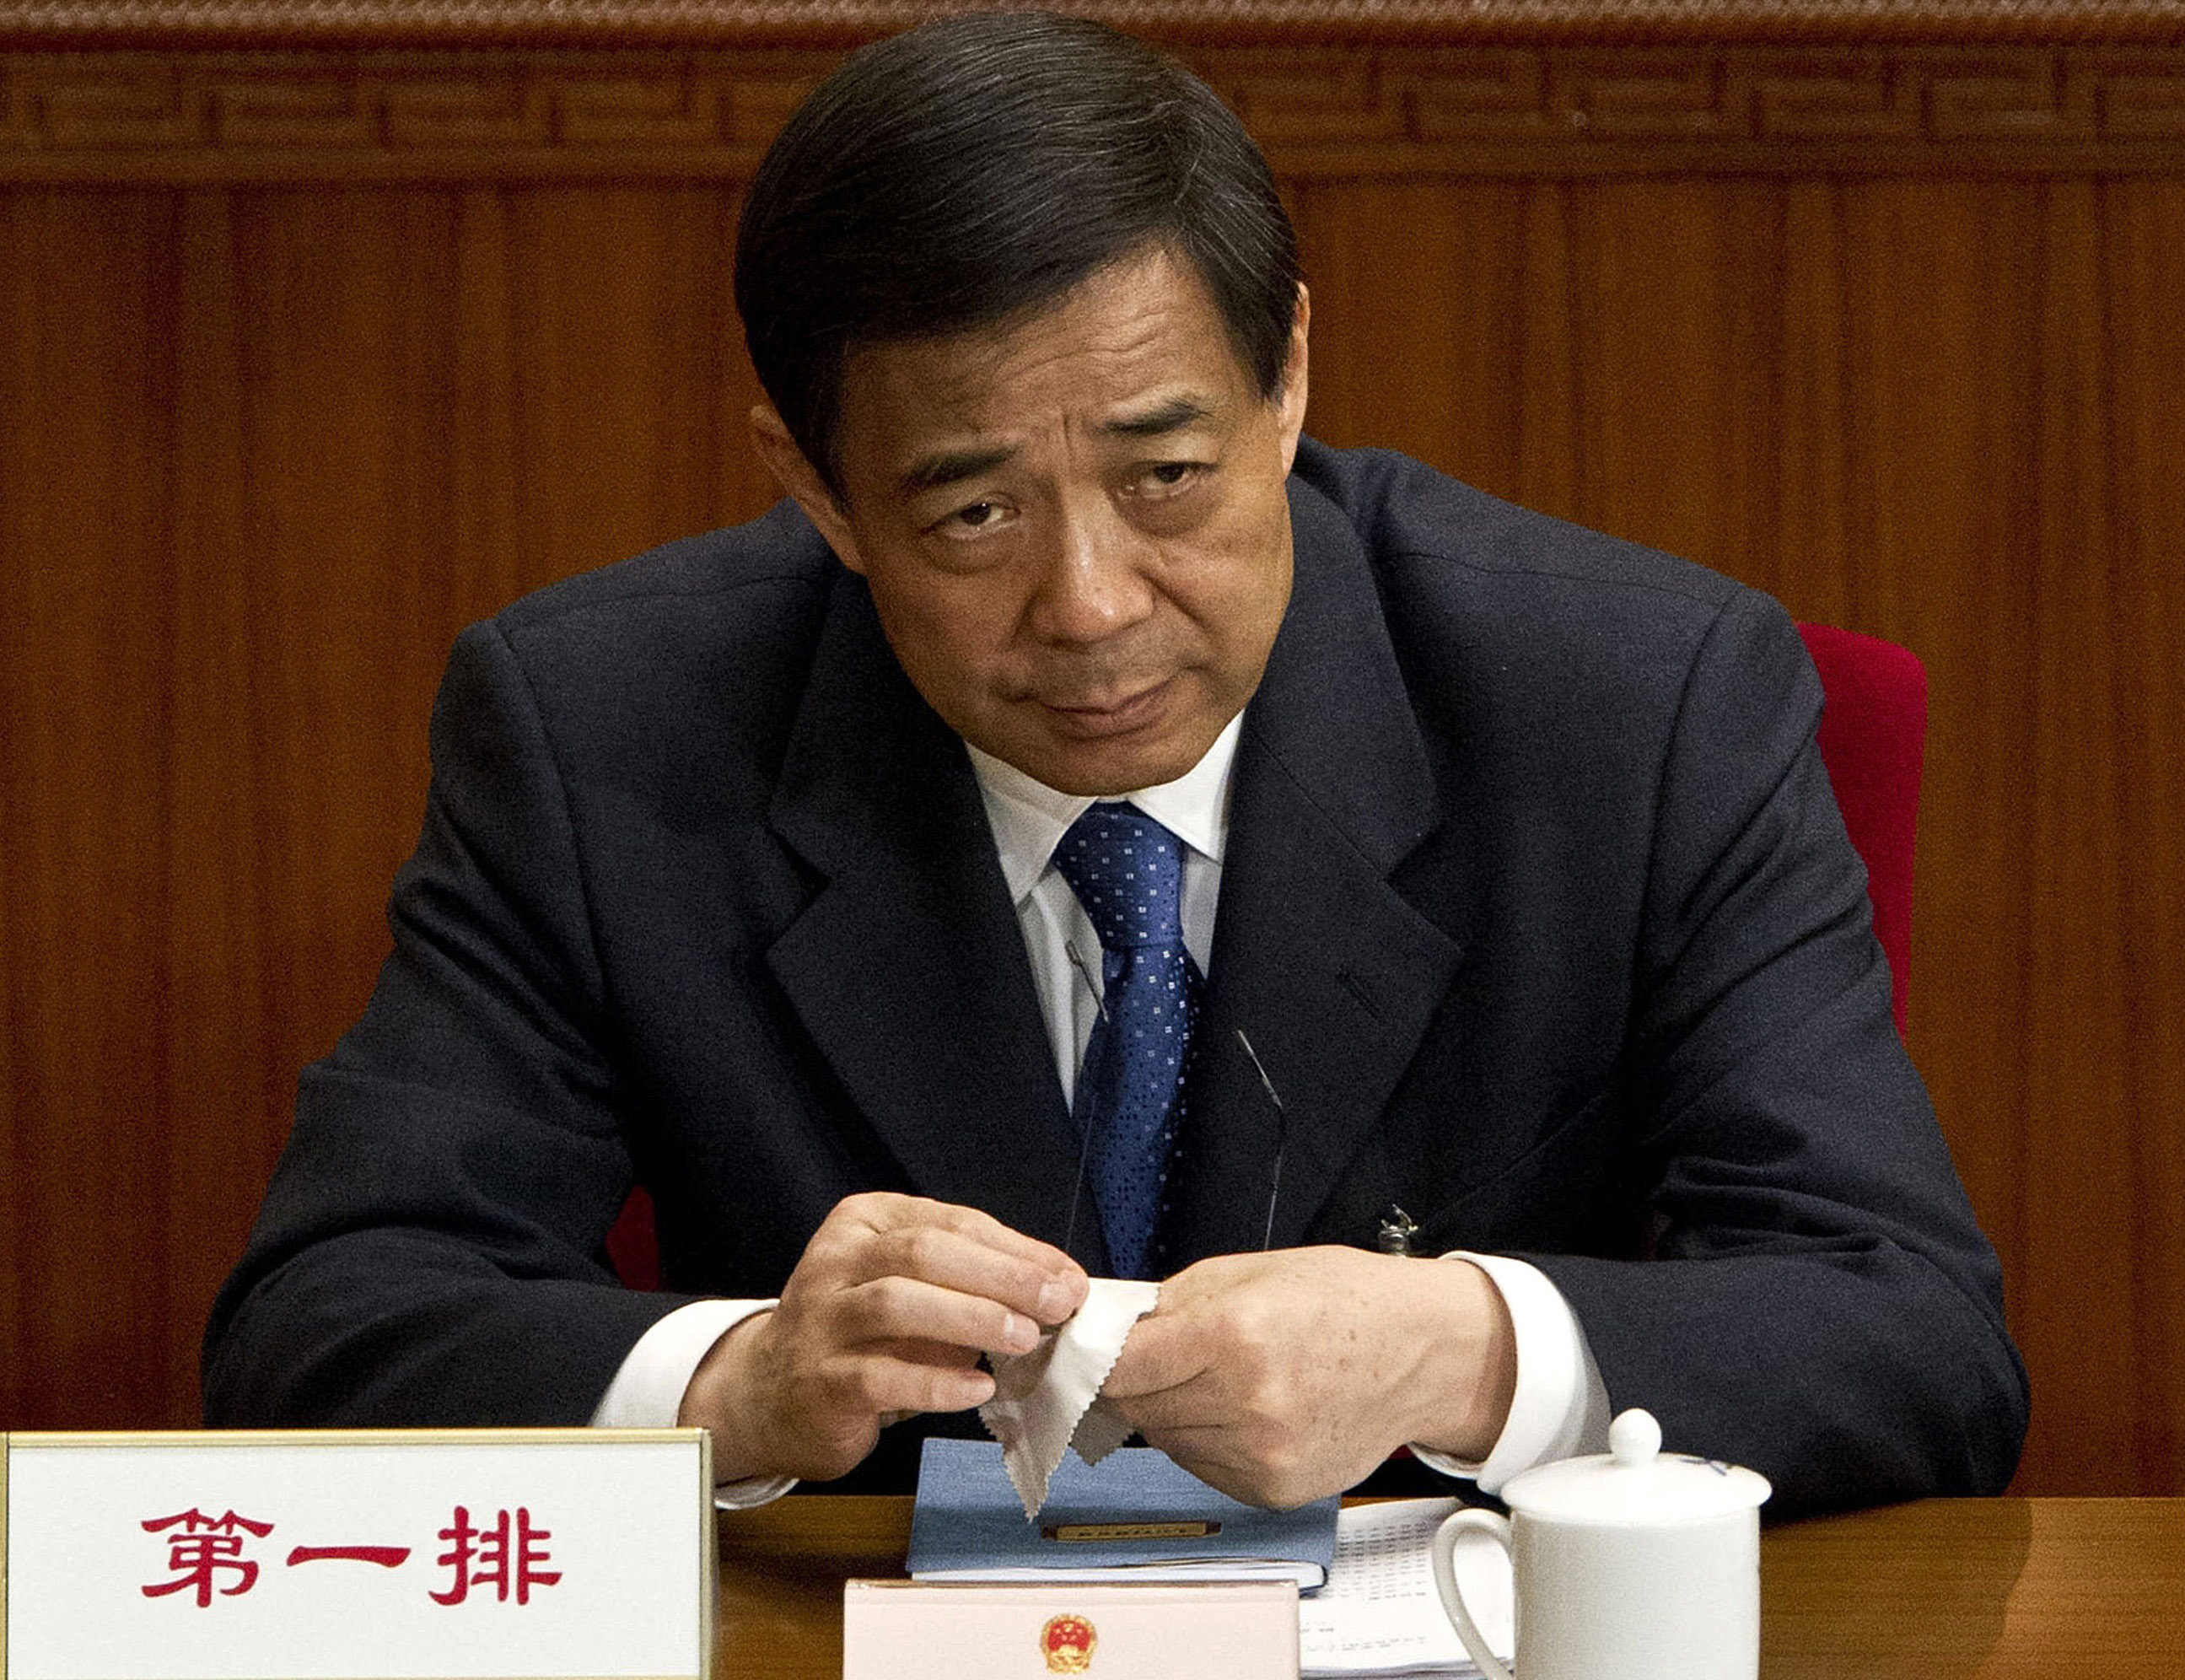 Bo Xilai, pictured during a plenary session of the National People's Congress at the Great Hall of the People in Beijing in March 2012. Photo: AP